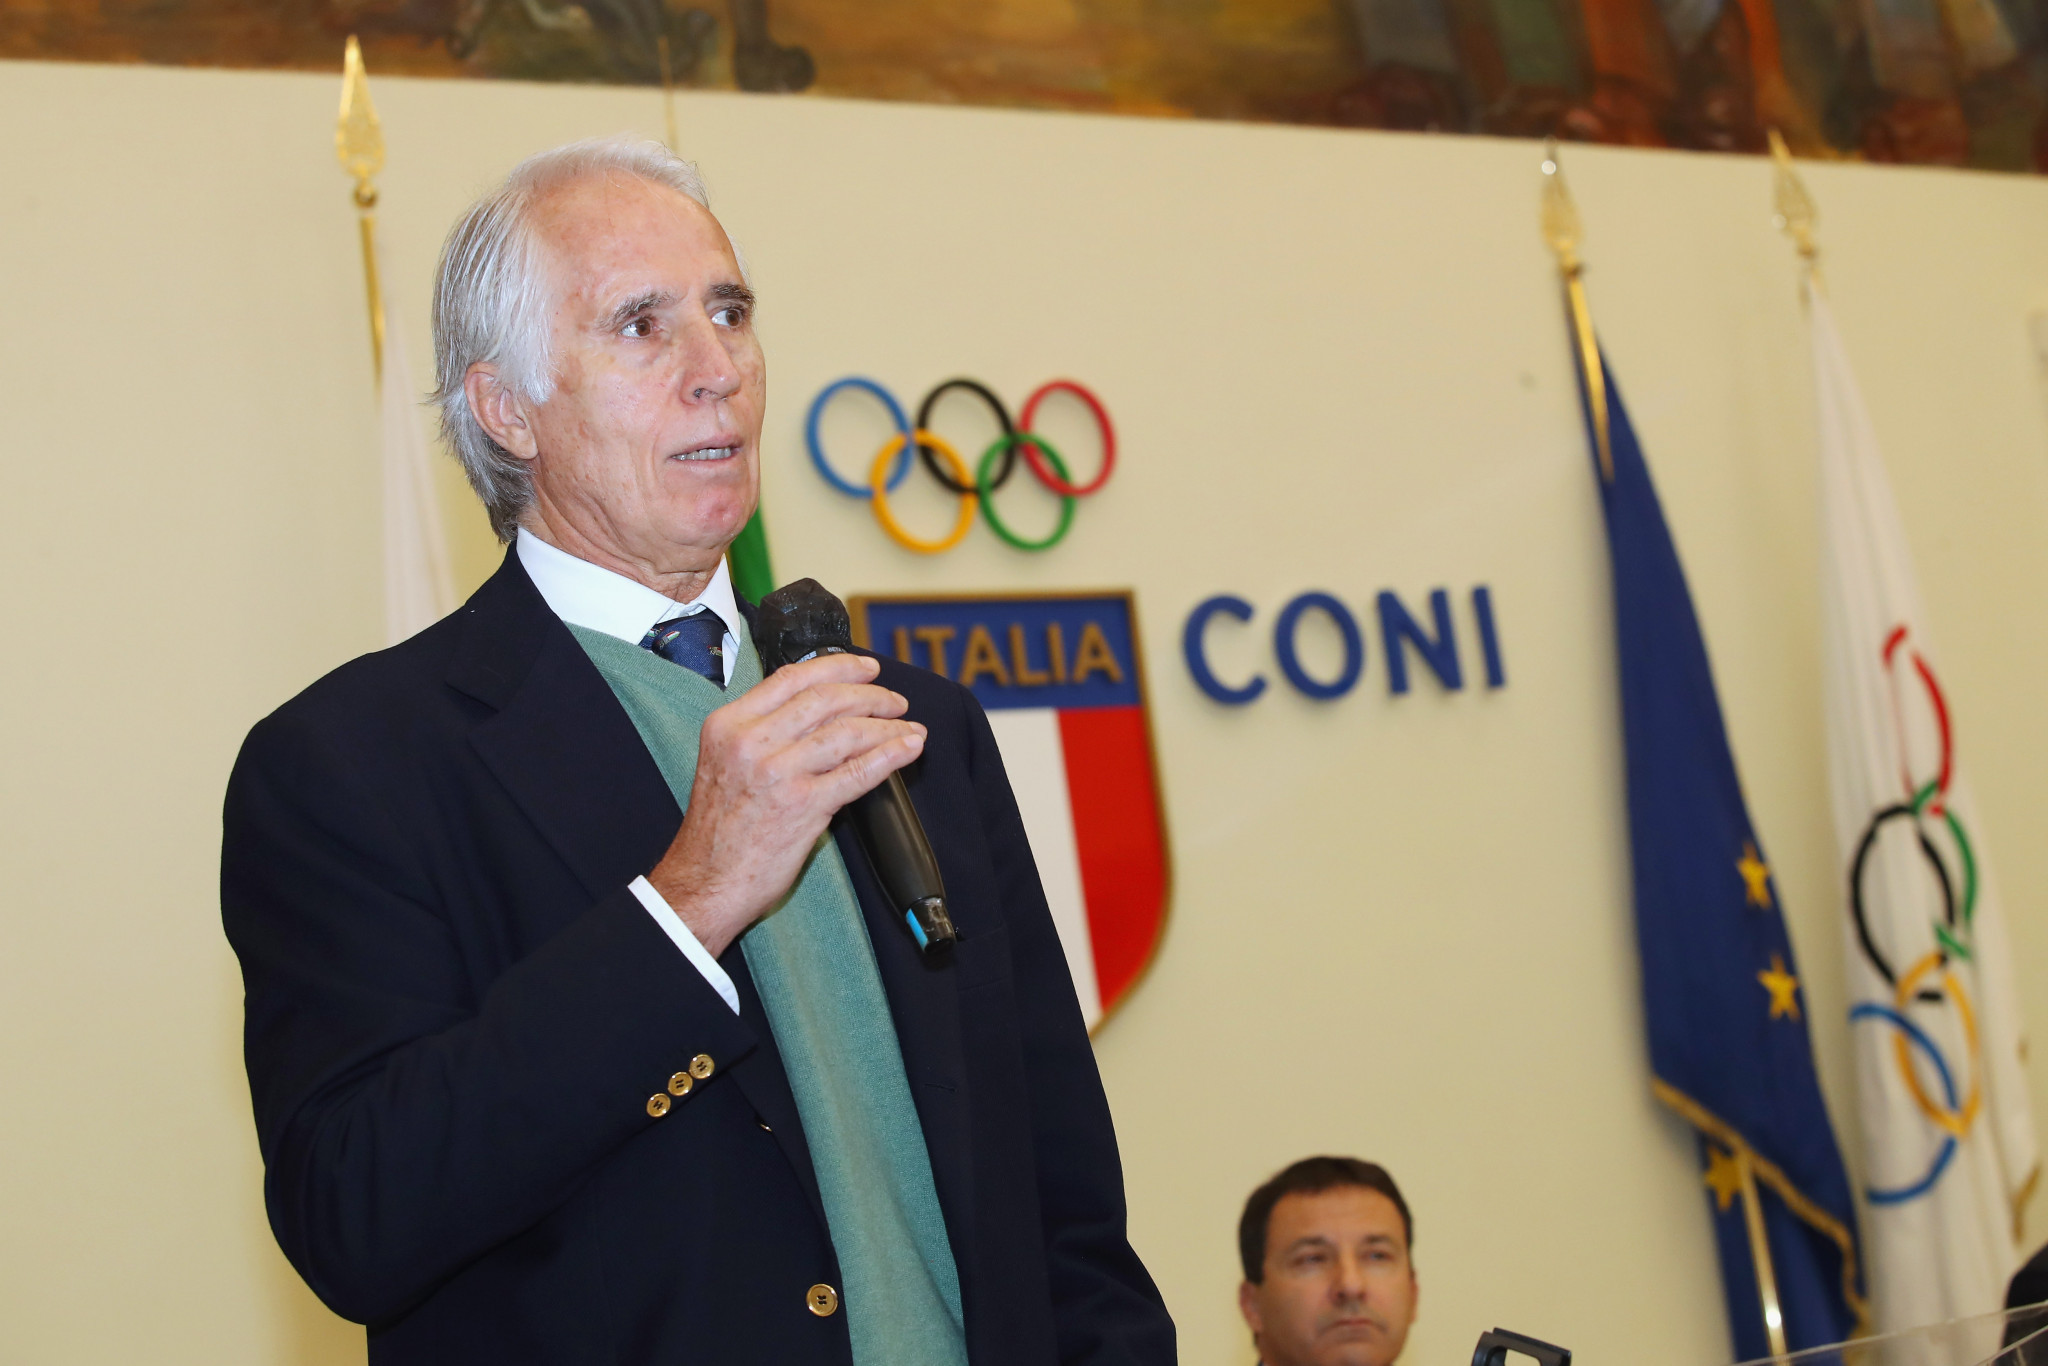 Malagò warns of not putting Milan Cortina 2026 in "risky situation" over construction delays